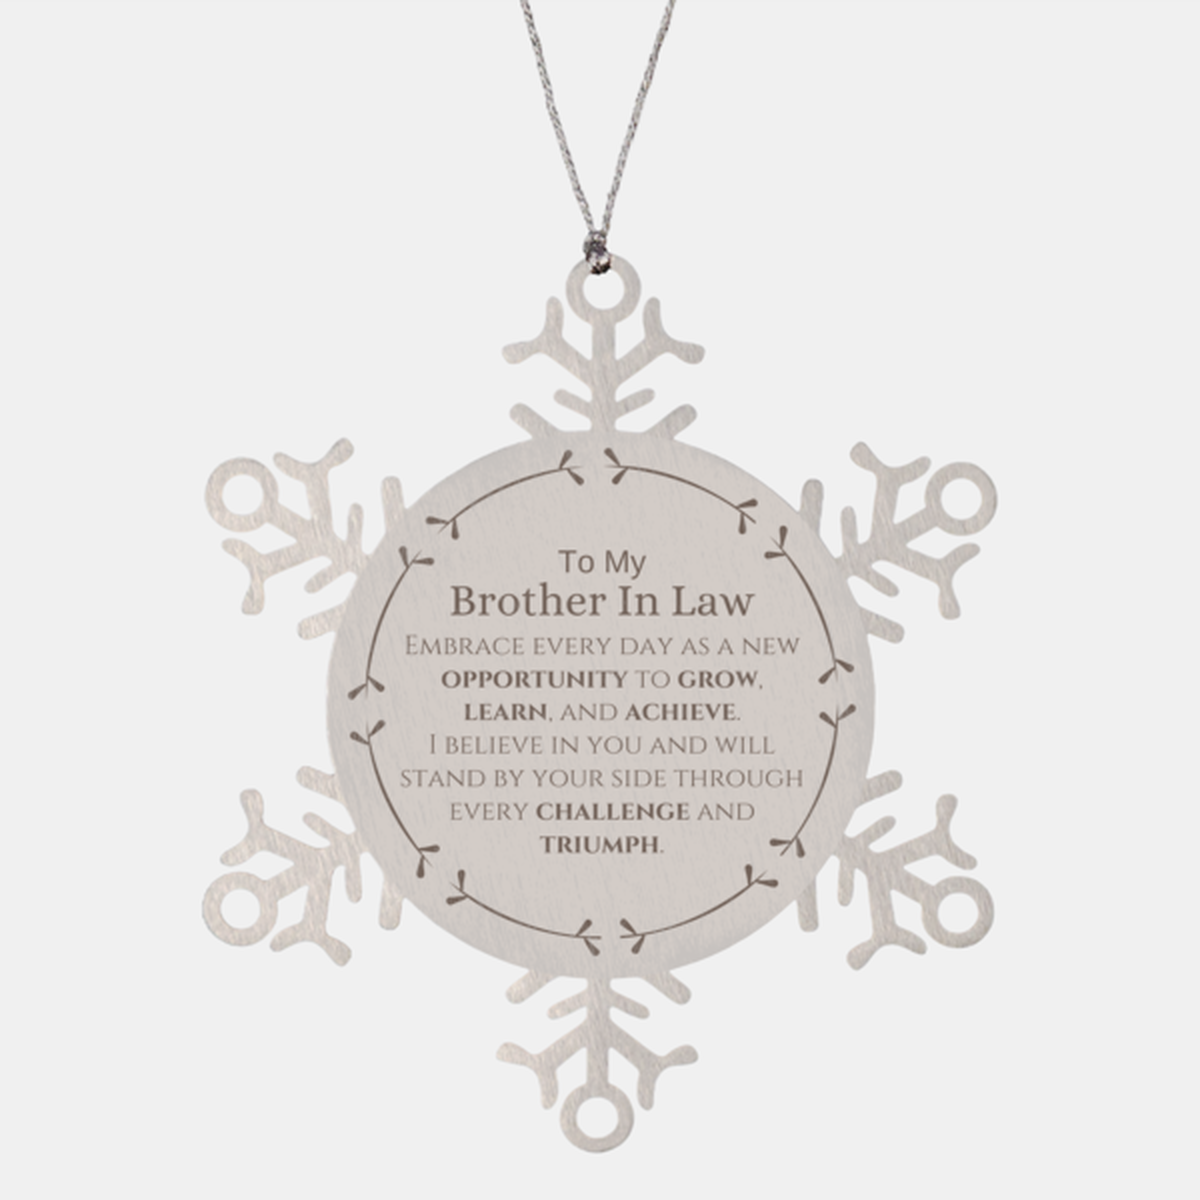 To My Brother In Law Gifts, I believe in you and will stand by your side, Inspirational Snowflake Ornament For Brother In Law, Birthday Christmas Motivational Brother In Law Gifts